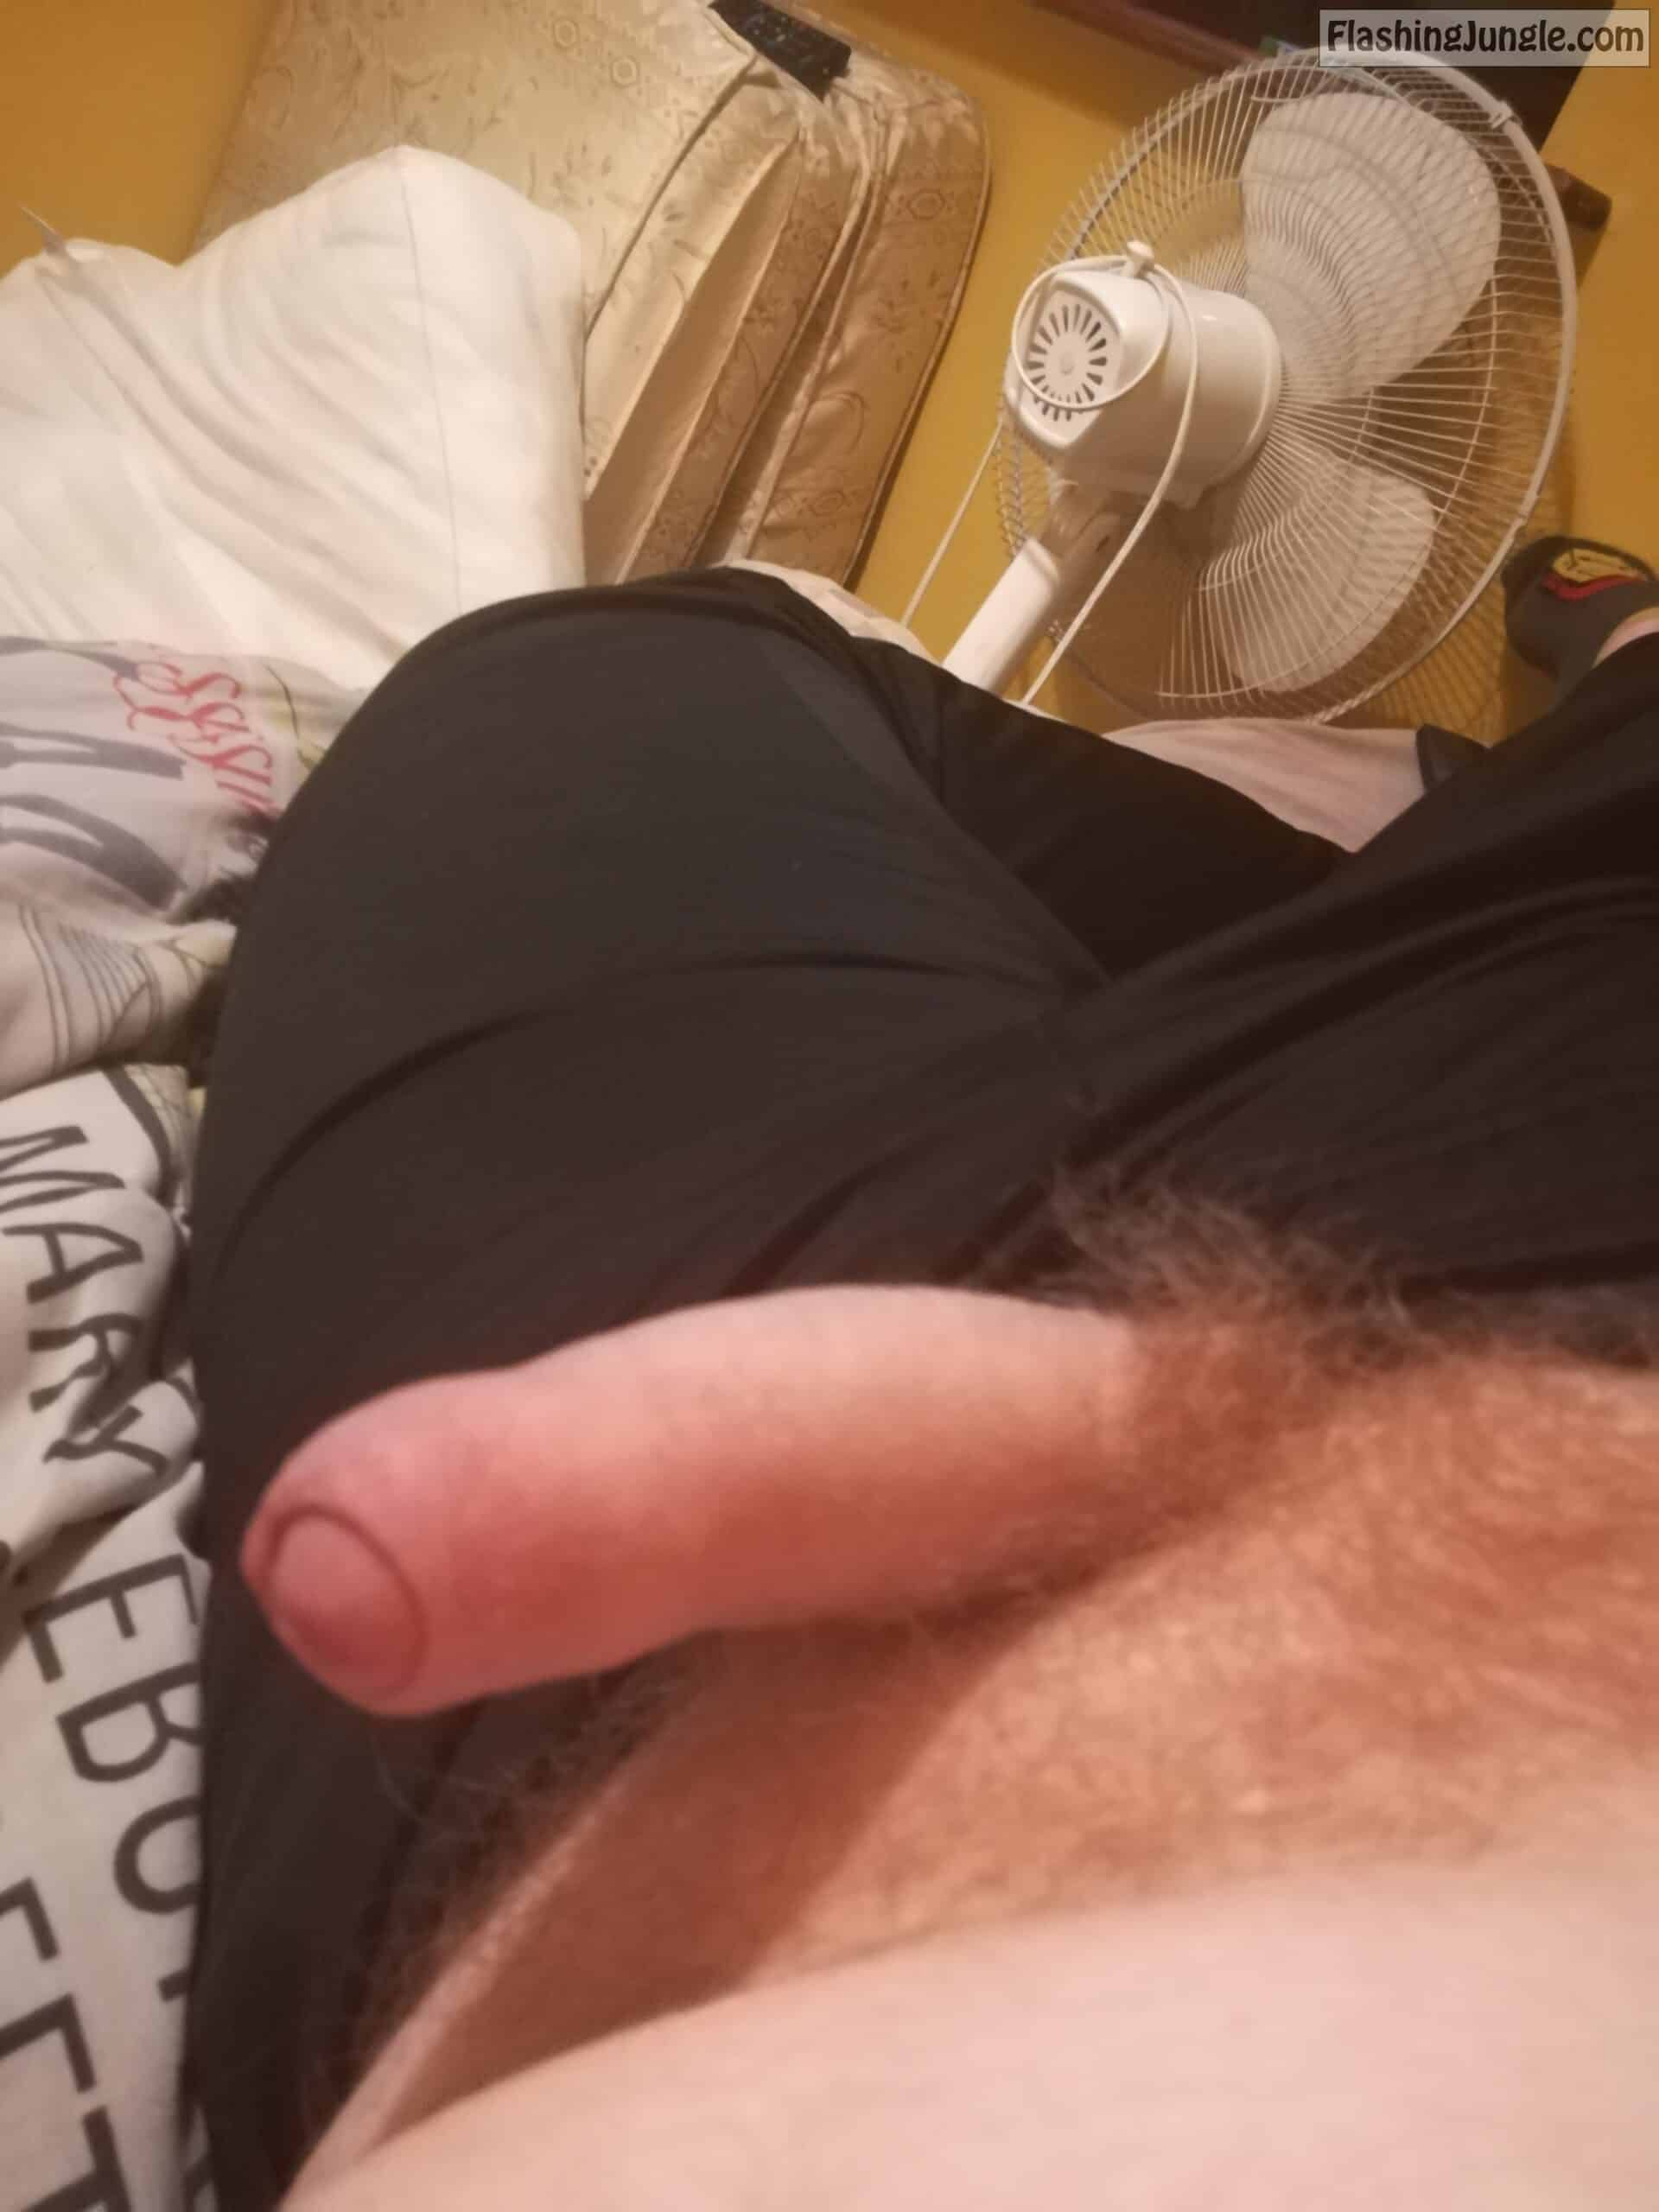 huge boobs bbc yes pics - My Amazing Foreskin Dick This is my first dick pic - Dick Flash Pics